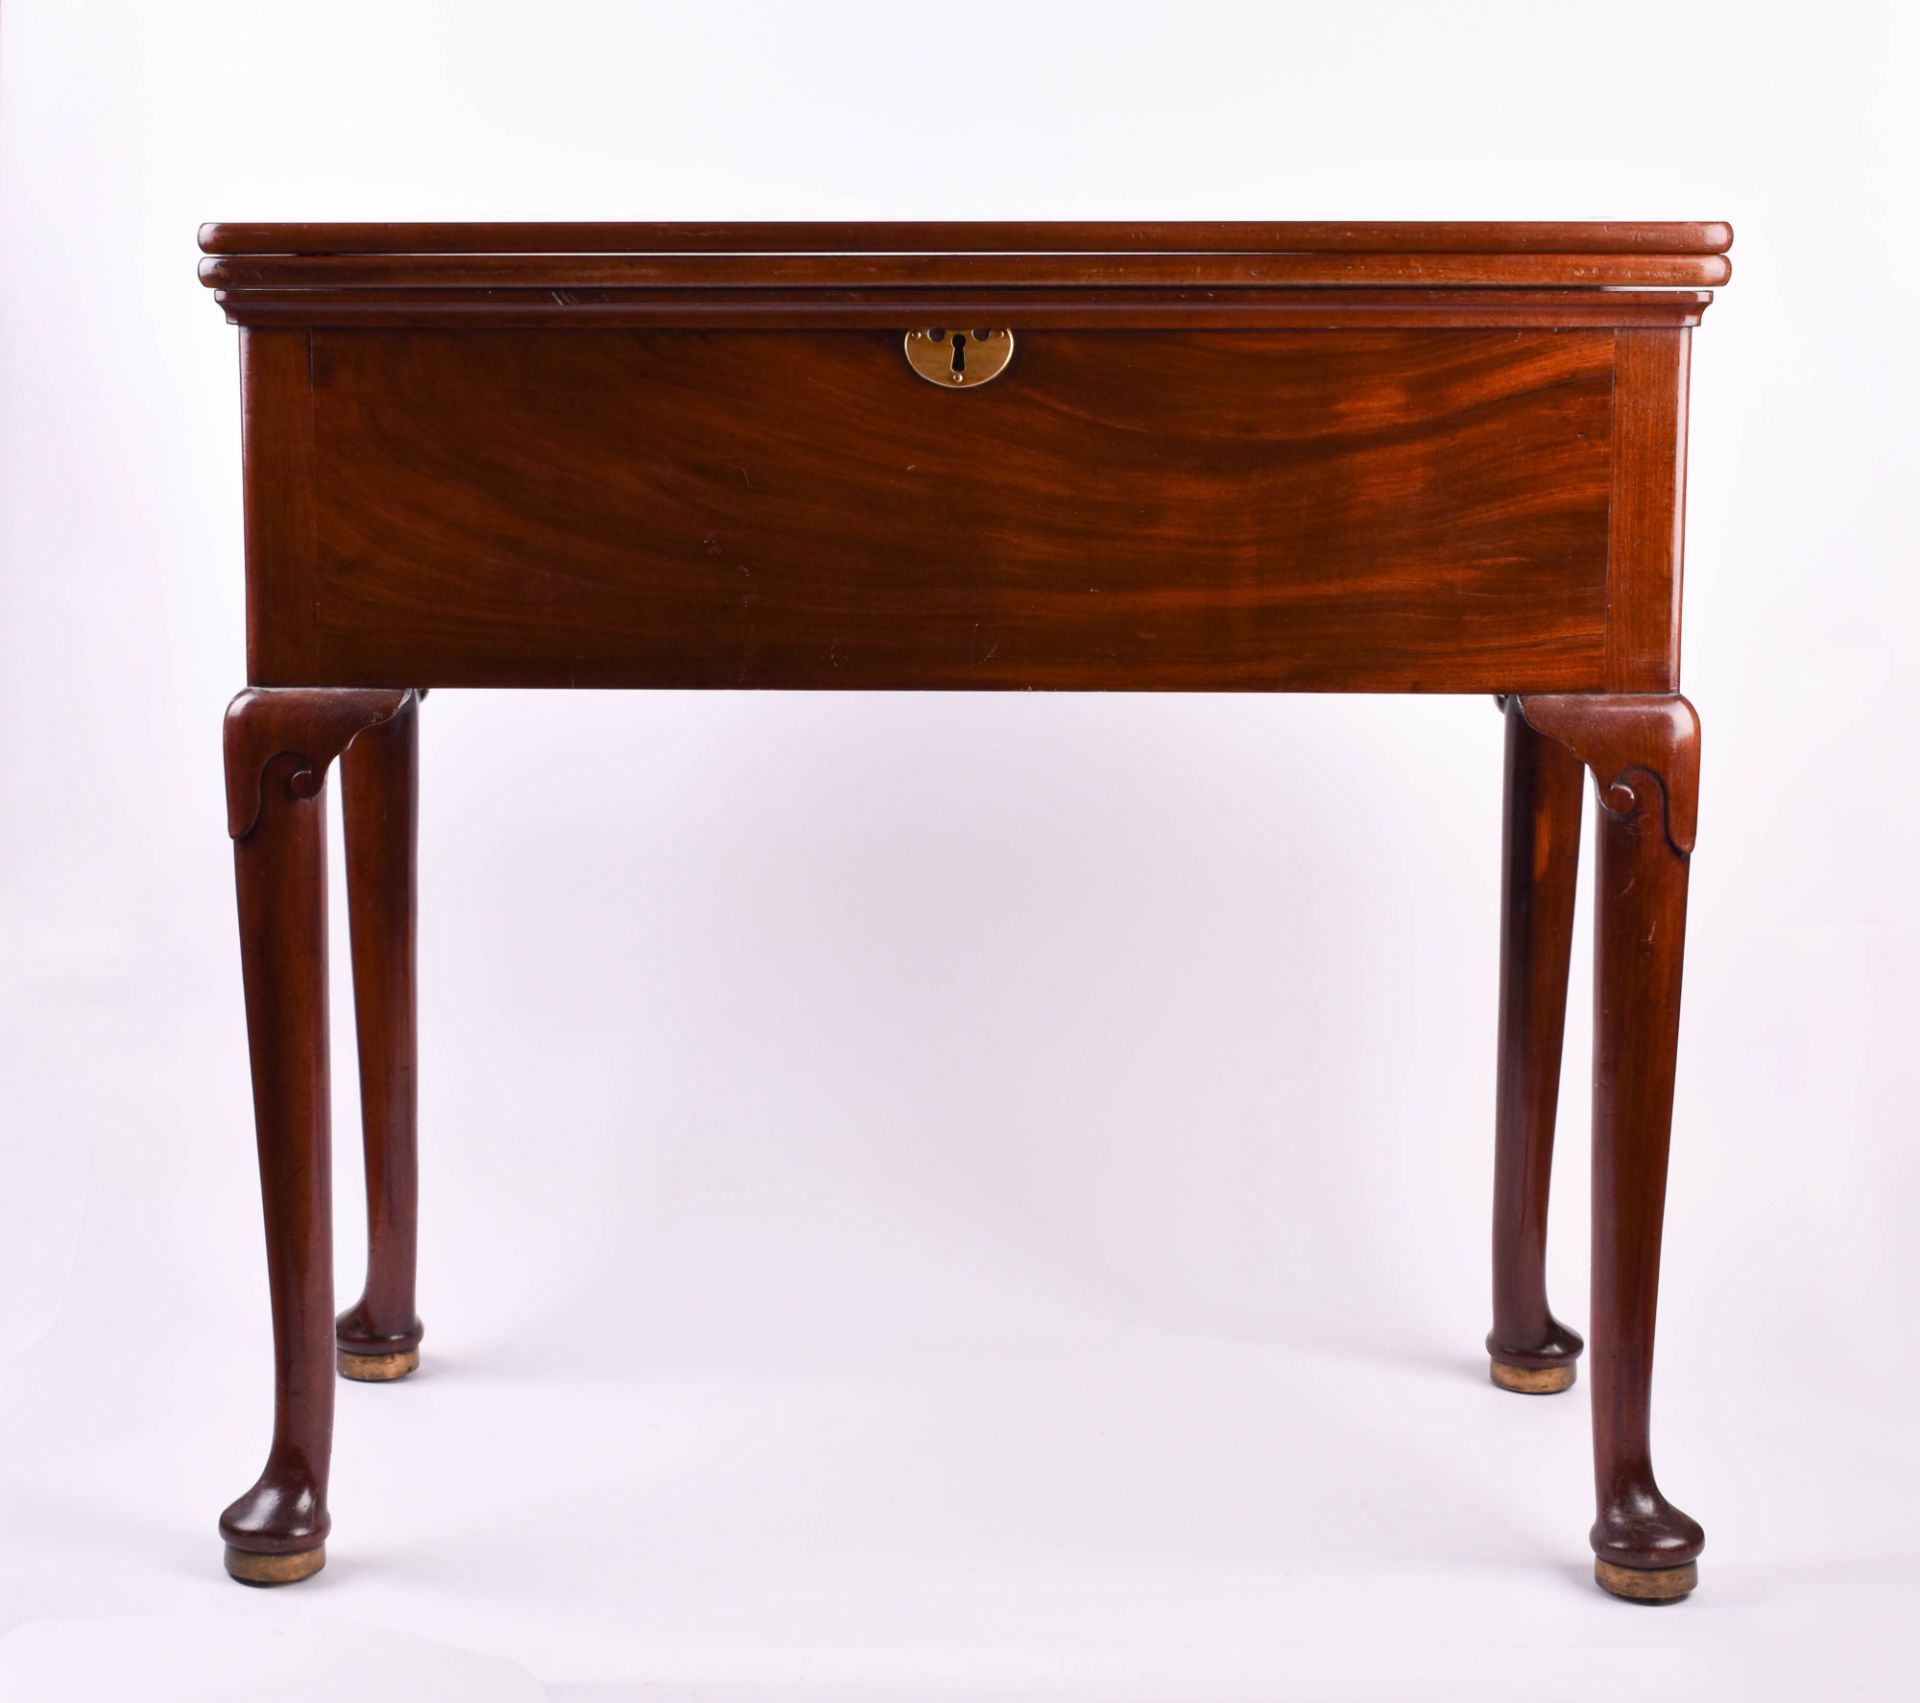 Extravagant transforming table in Chippendale style 19th century